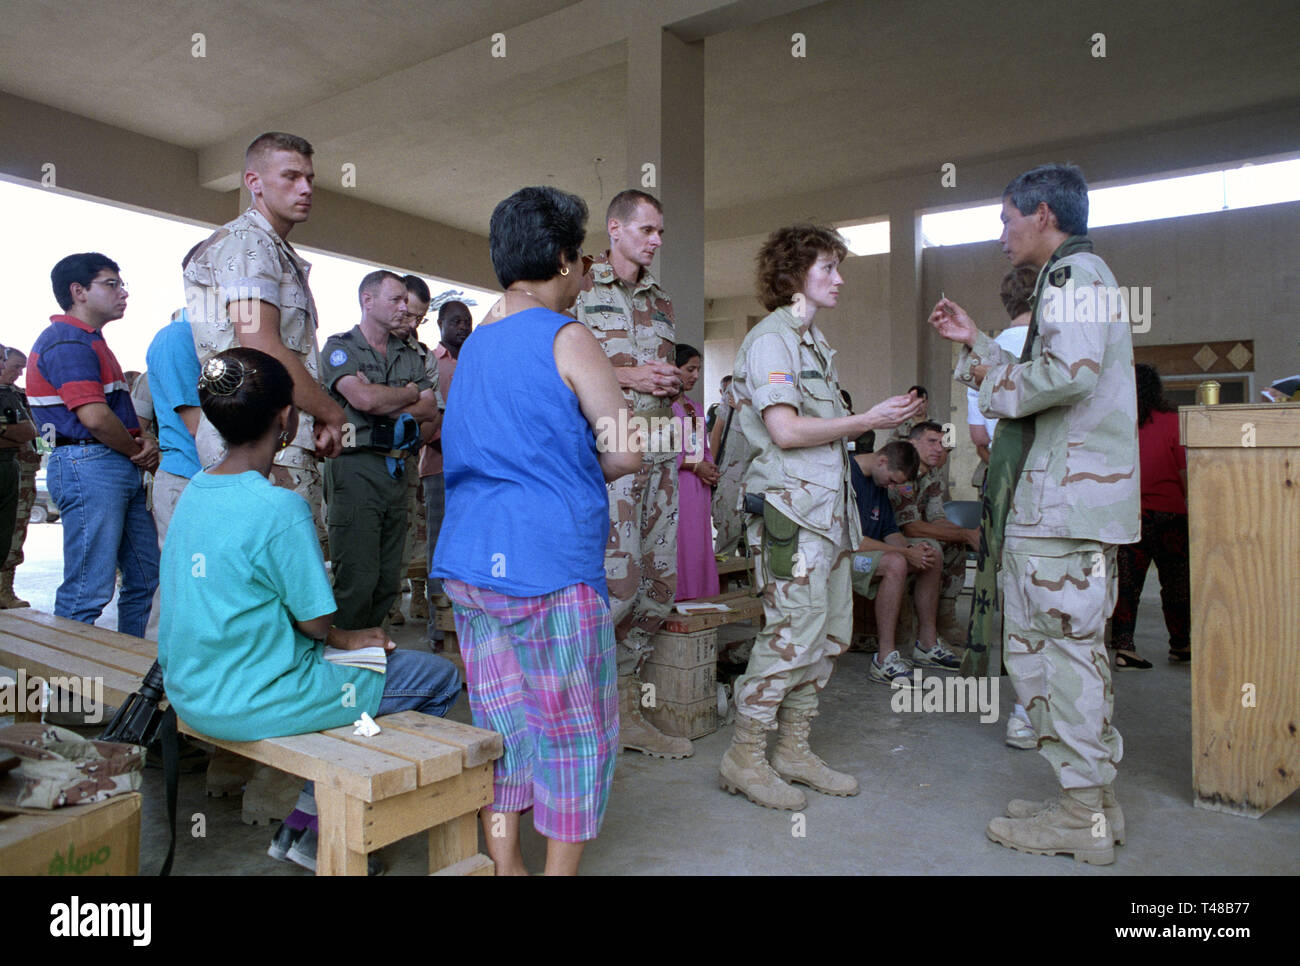 31st October 1993 Mogadishu, Somalia: a church service for U.S. forces in the UNOSOM headquarters compound, led by a chaplain with the 44th Medical Brigade. Stock Photo